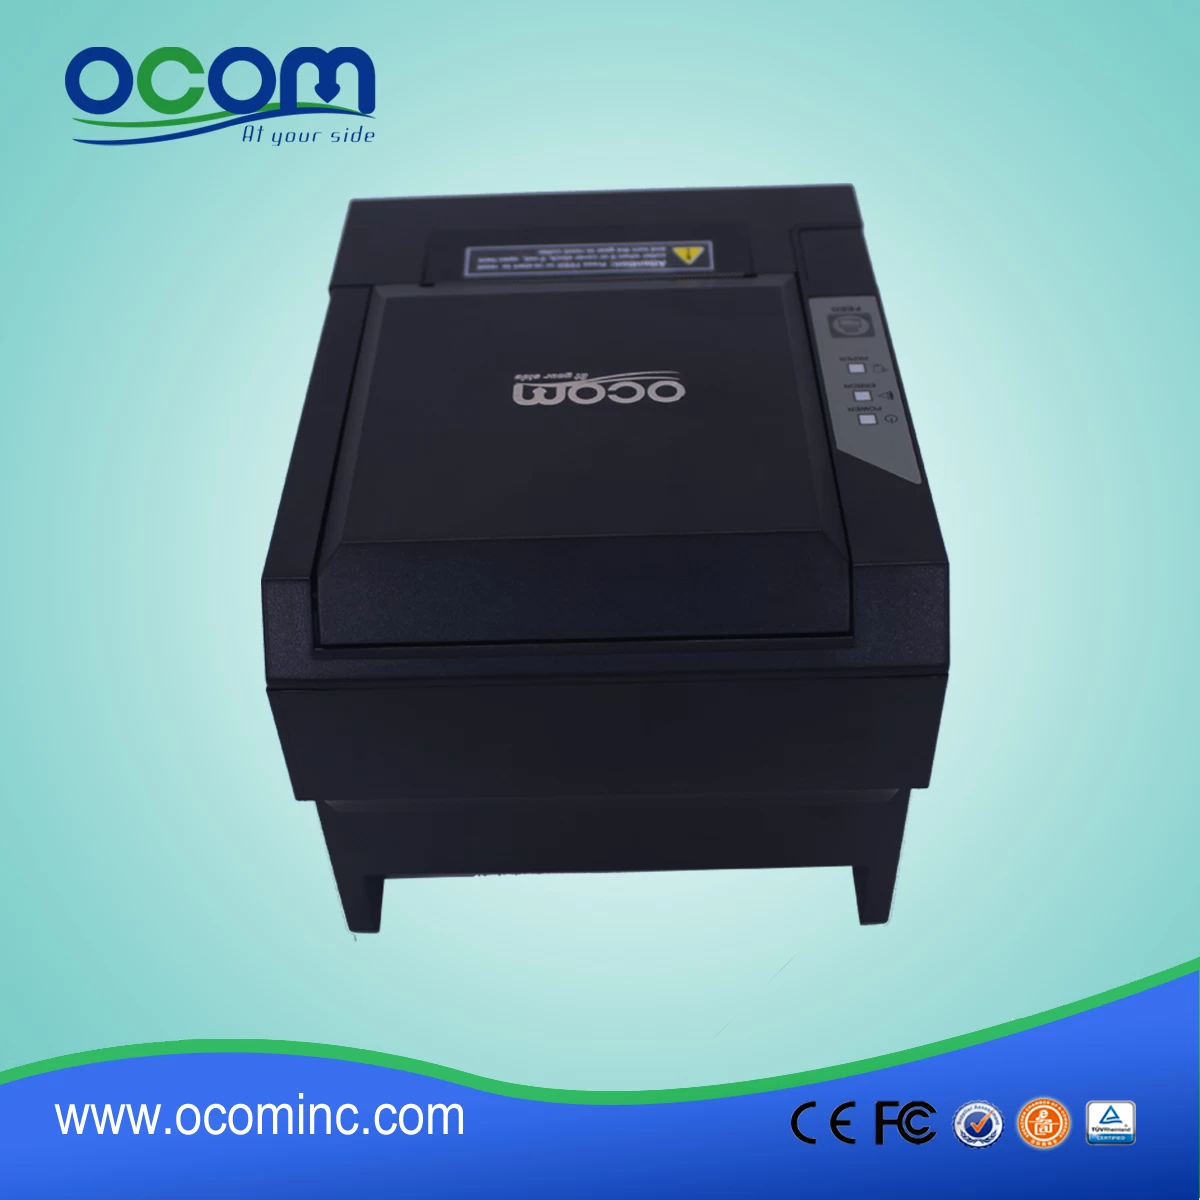 OCPP-80G---China made handheld thermal receipt printers with auto cutter